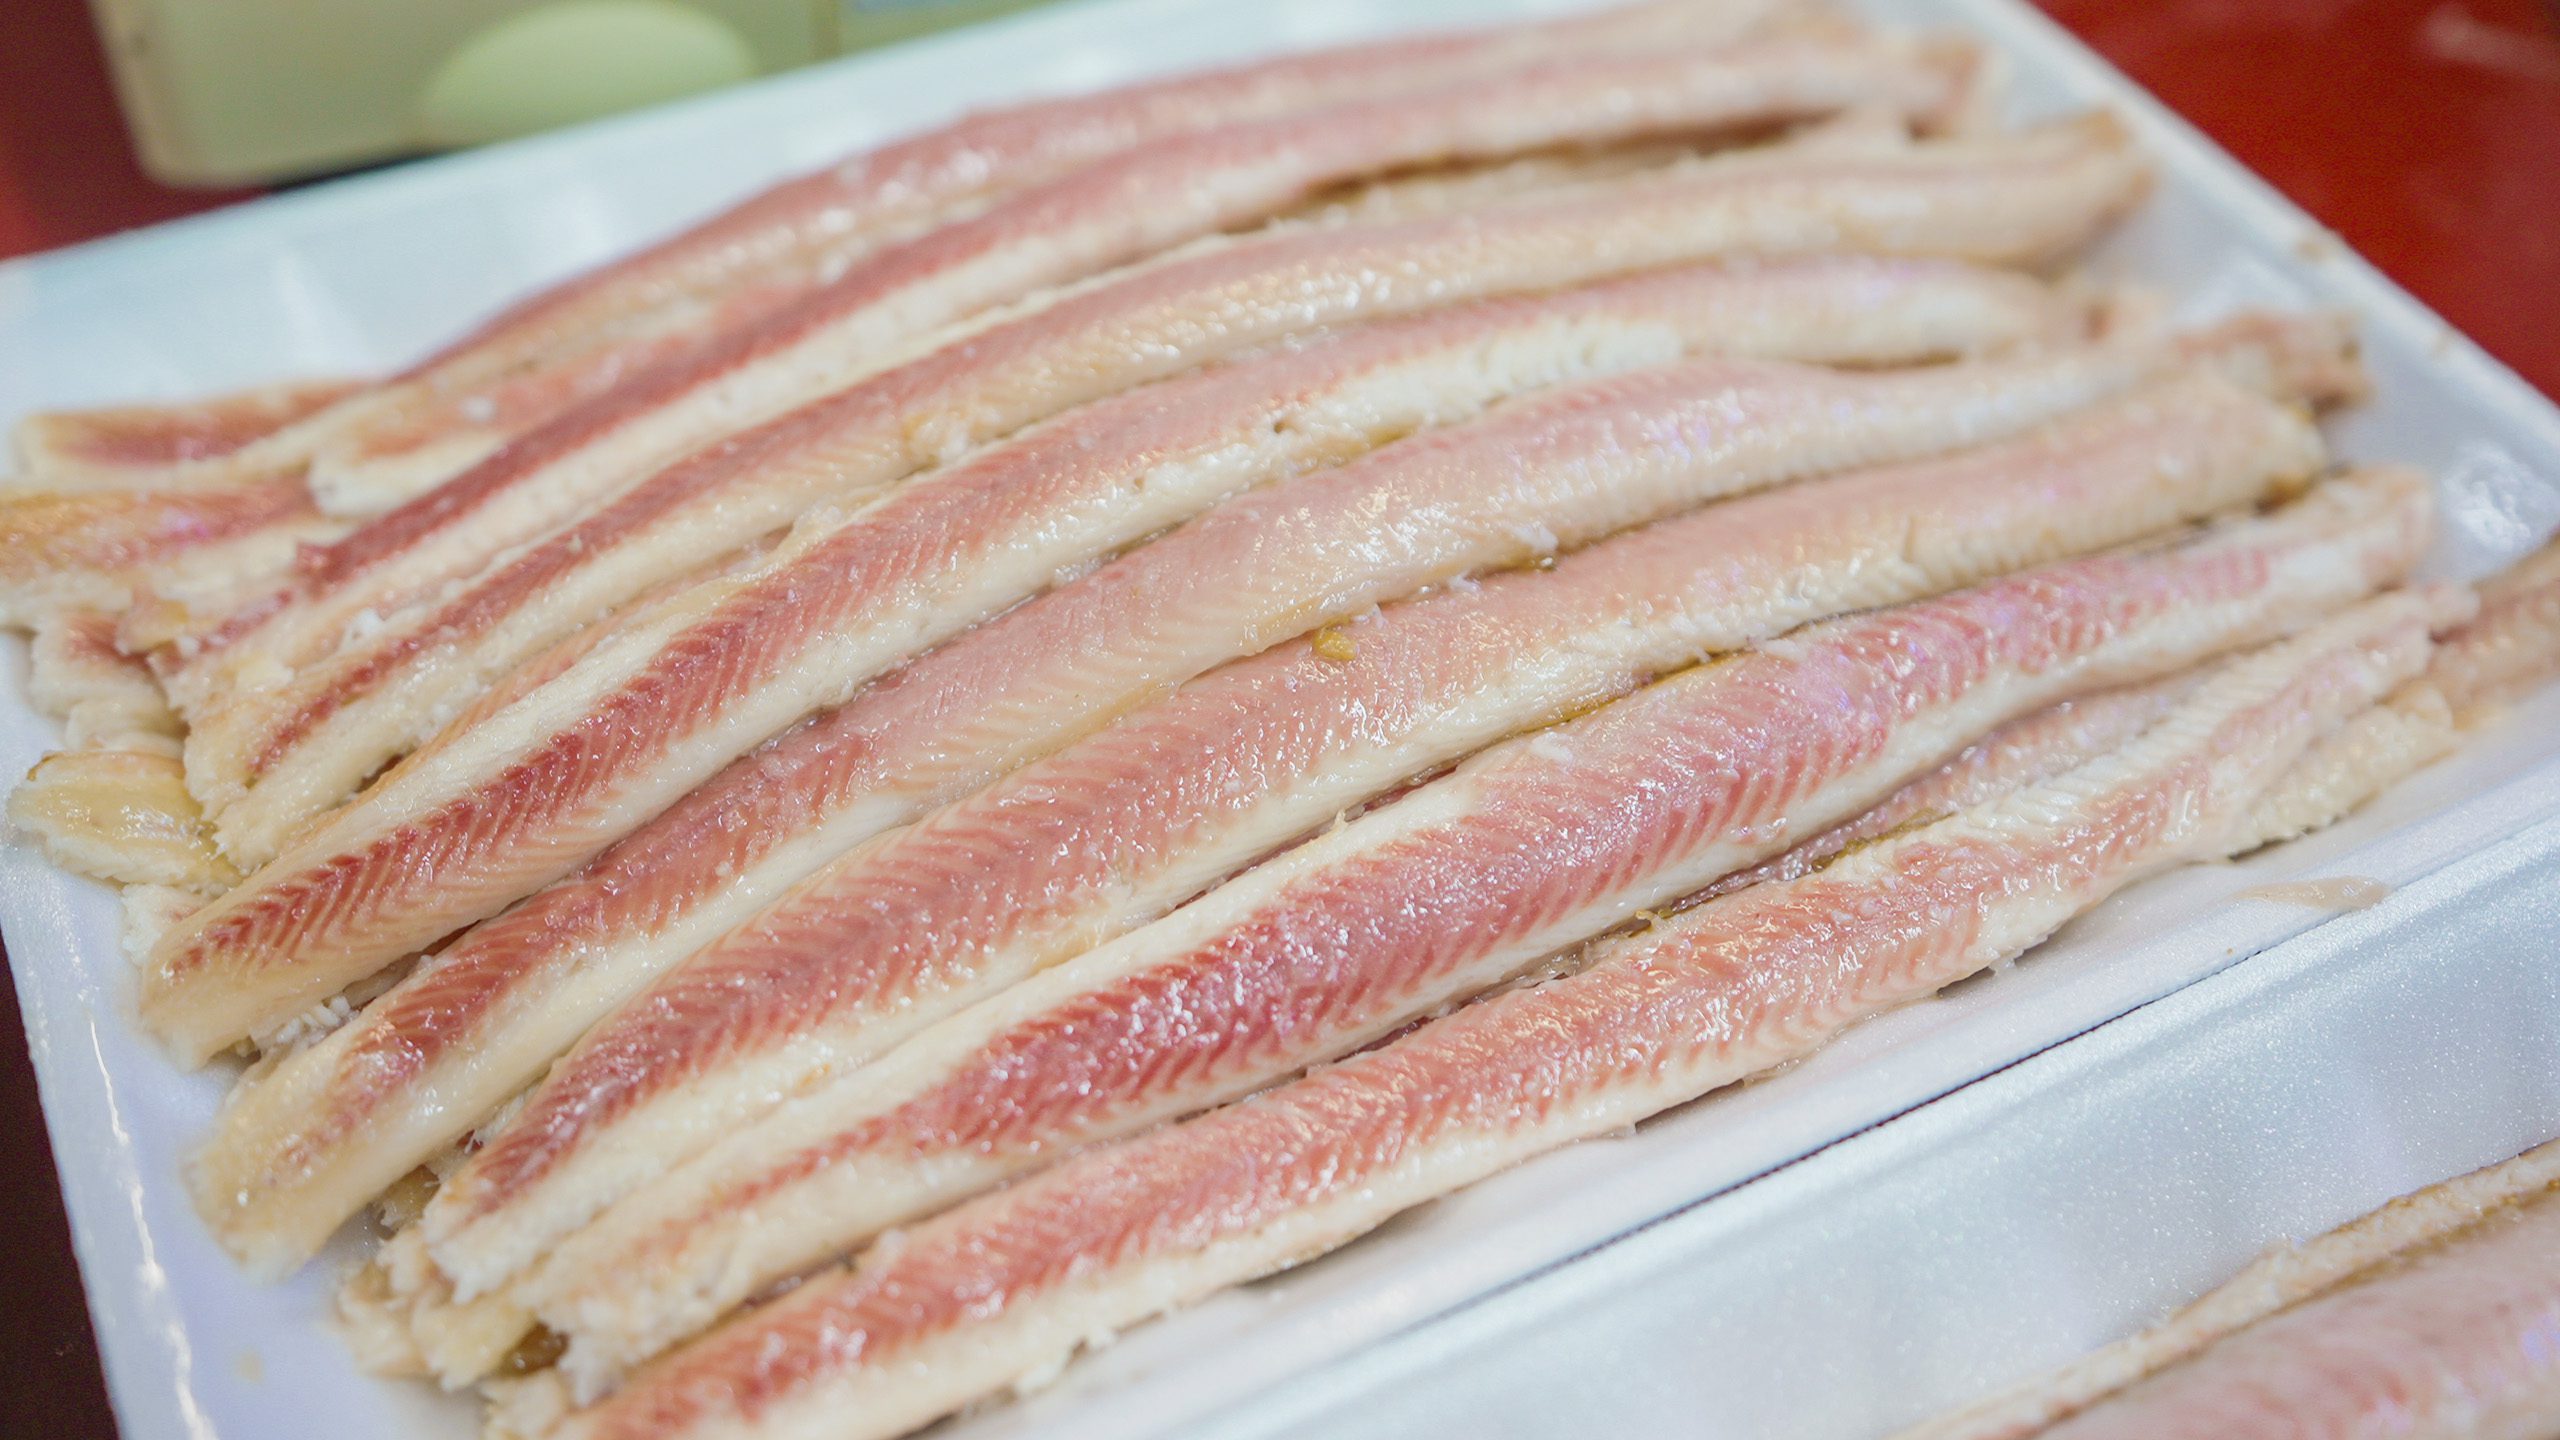 A tray full of fresh smoked eel in Volendam, the Netherlands | Davidsbeenhere